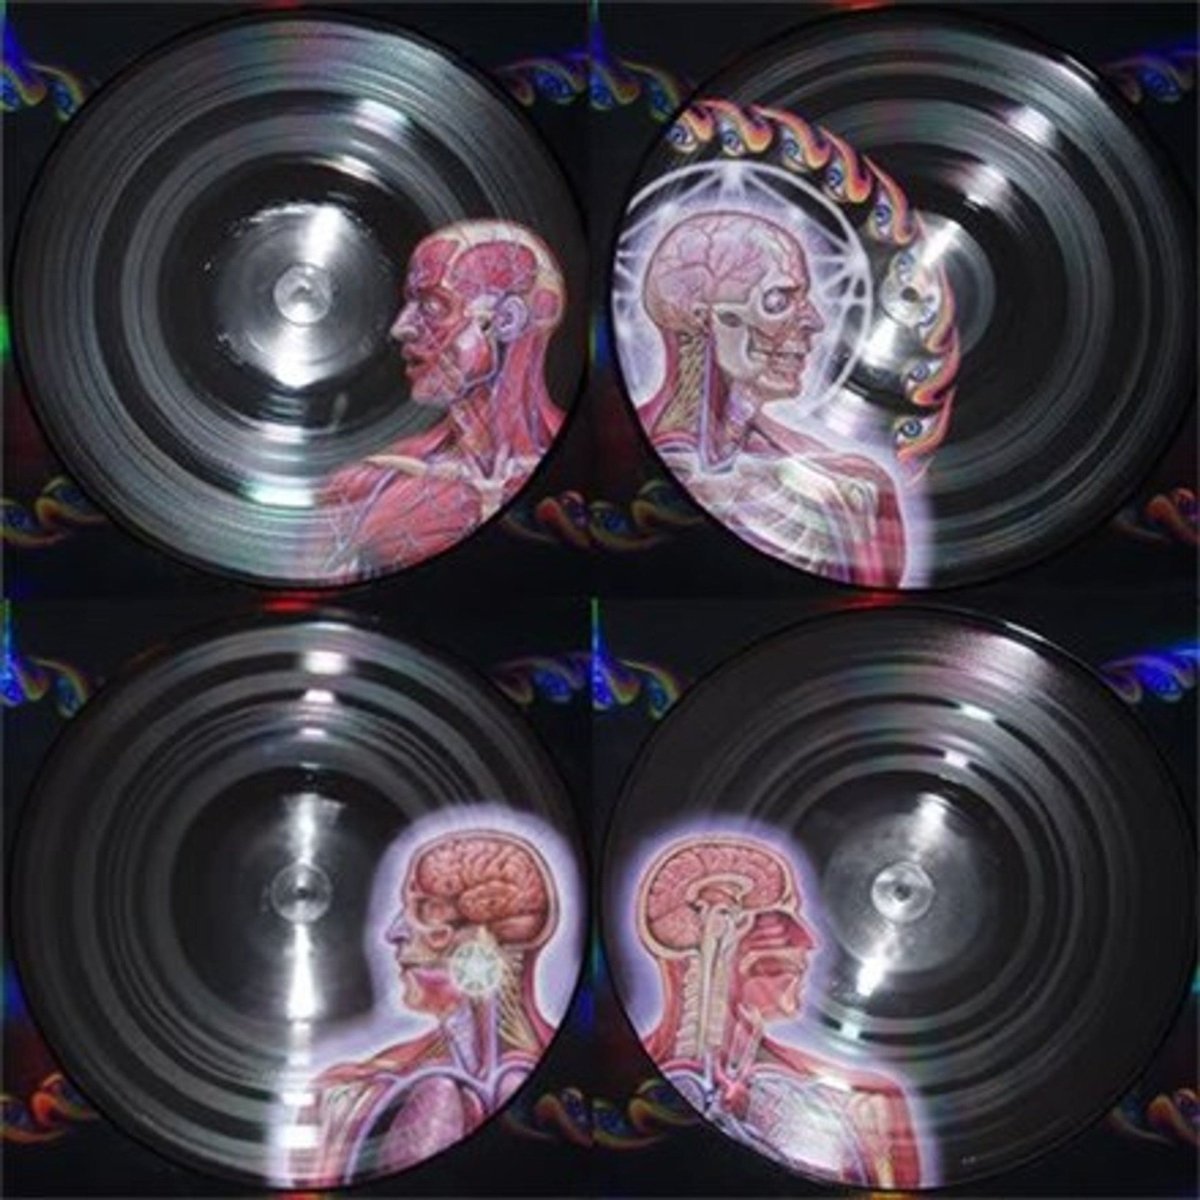 Tool - Lateralus - 2x Picture Disc Vinyl Record - Indie Vinyl Den